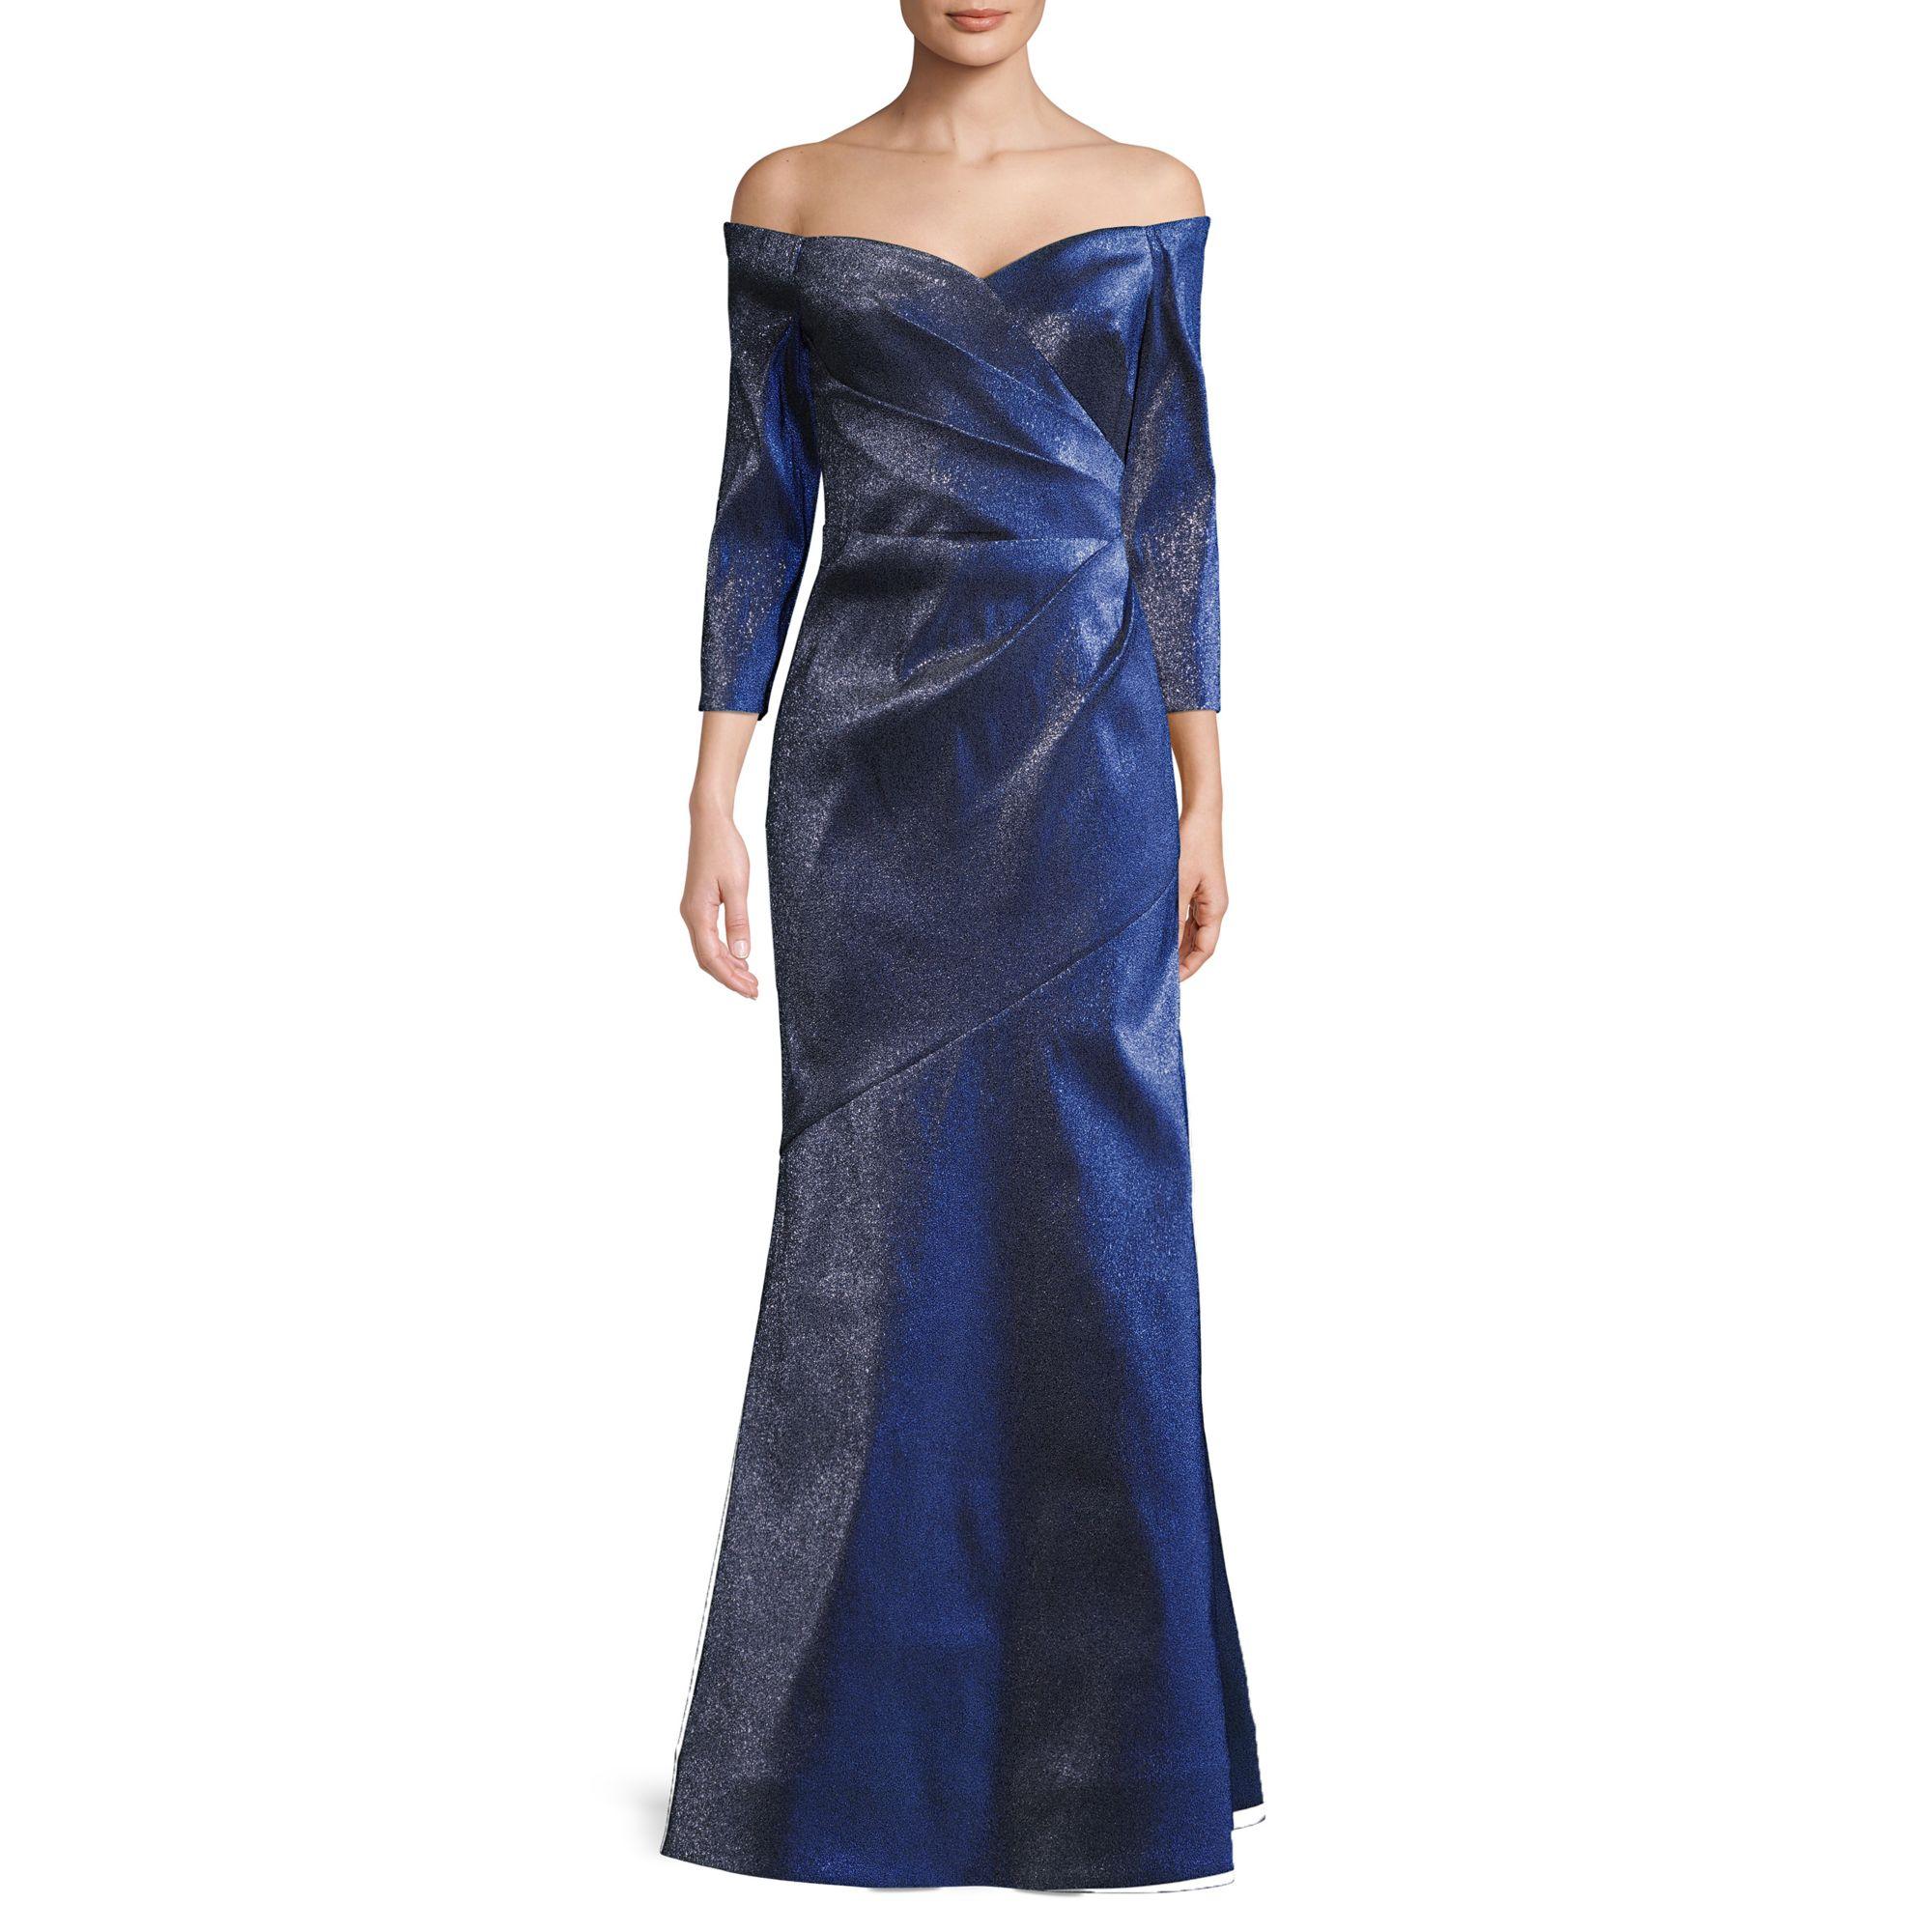 THEIA Synthetic Pleated Off-the-shoulder Gown in Sapphire (Blue) - Lyst